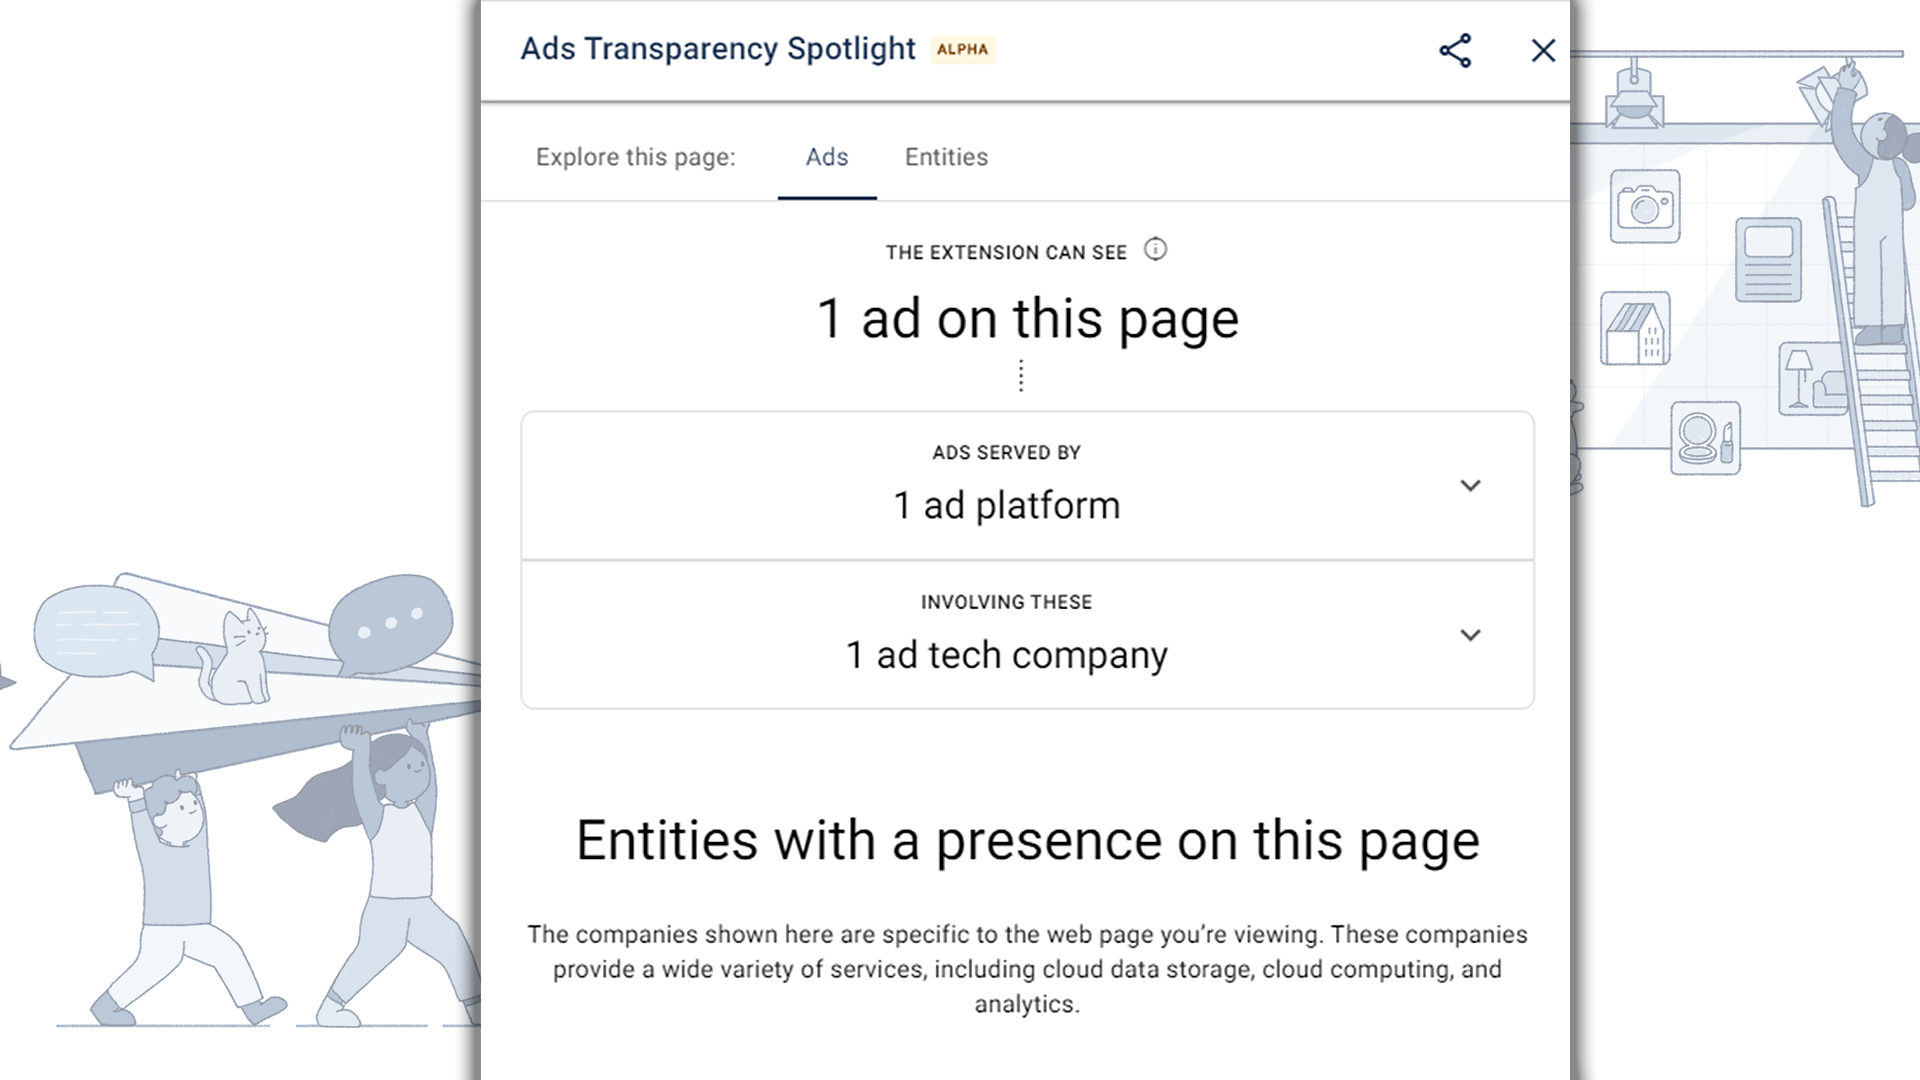 Google Chrome’s “Adverts Transparency Spotlight” Extension Shows How Adverts Track You